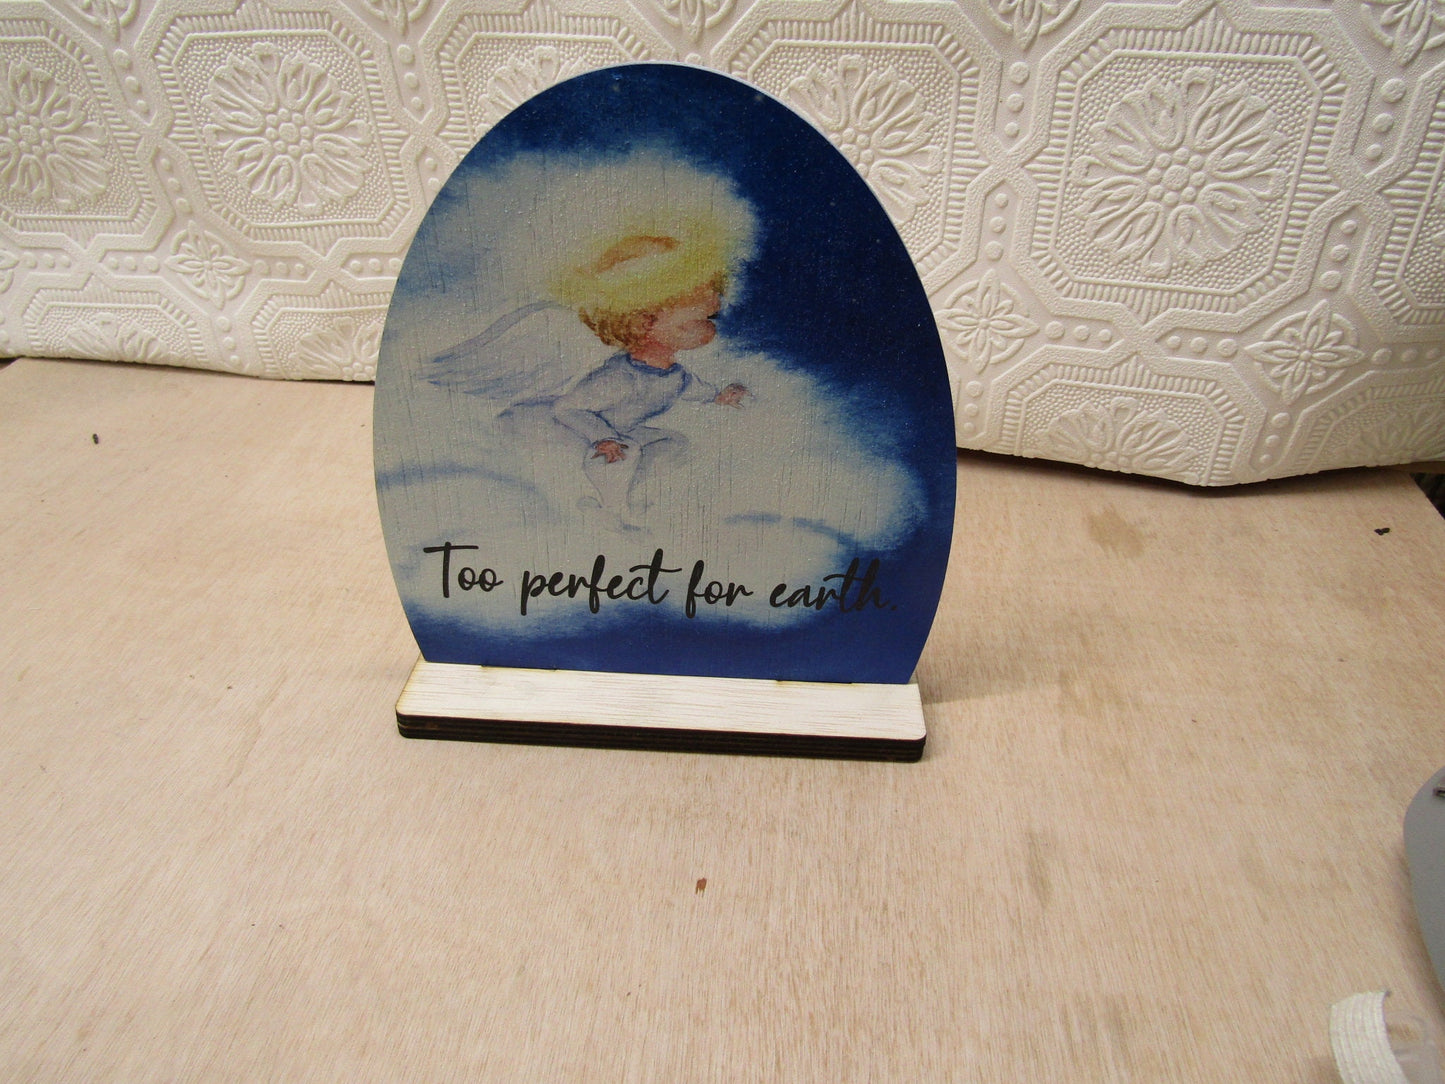 Angel Baby Memorial Stand Oval Image Printed In Remembrance Life Meaningful Too Perfect For Earth Infant Miscarriage Gift Small Angel Plaque